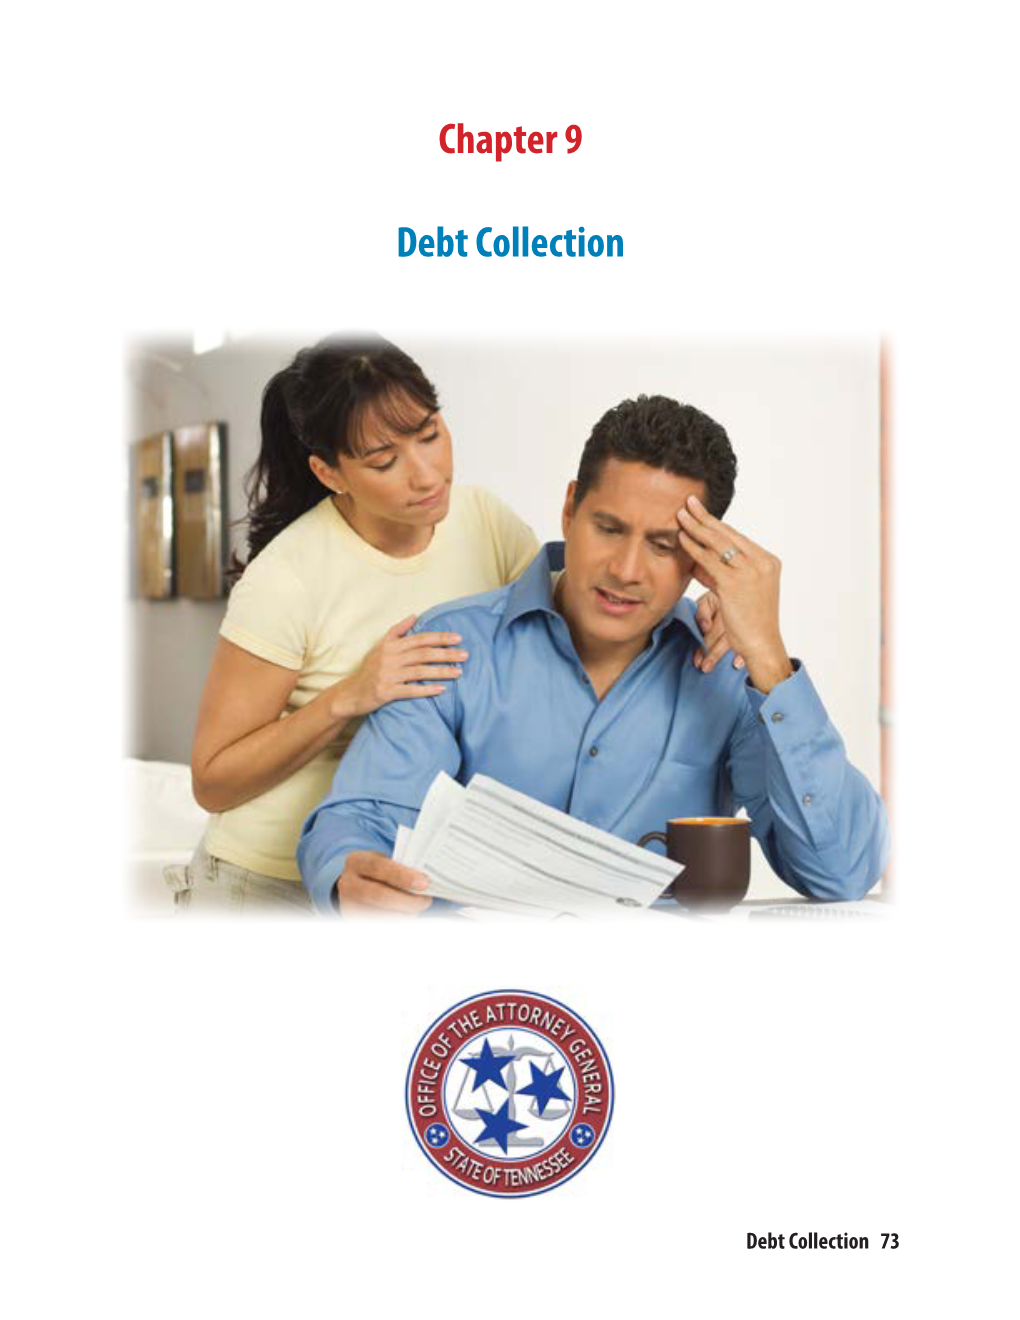 Chapter 9: Debt Collection